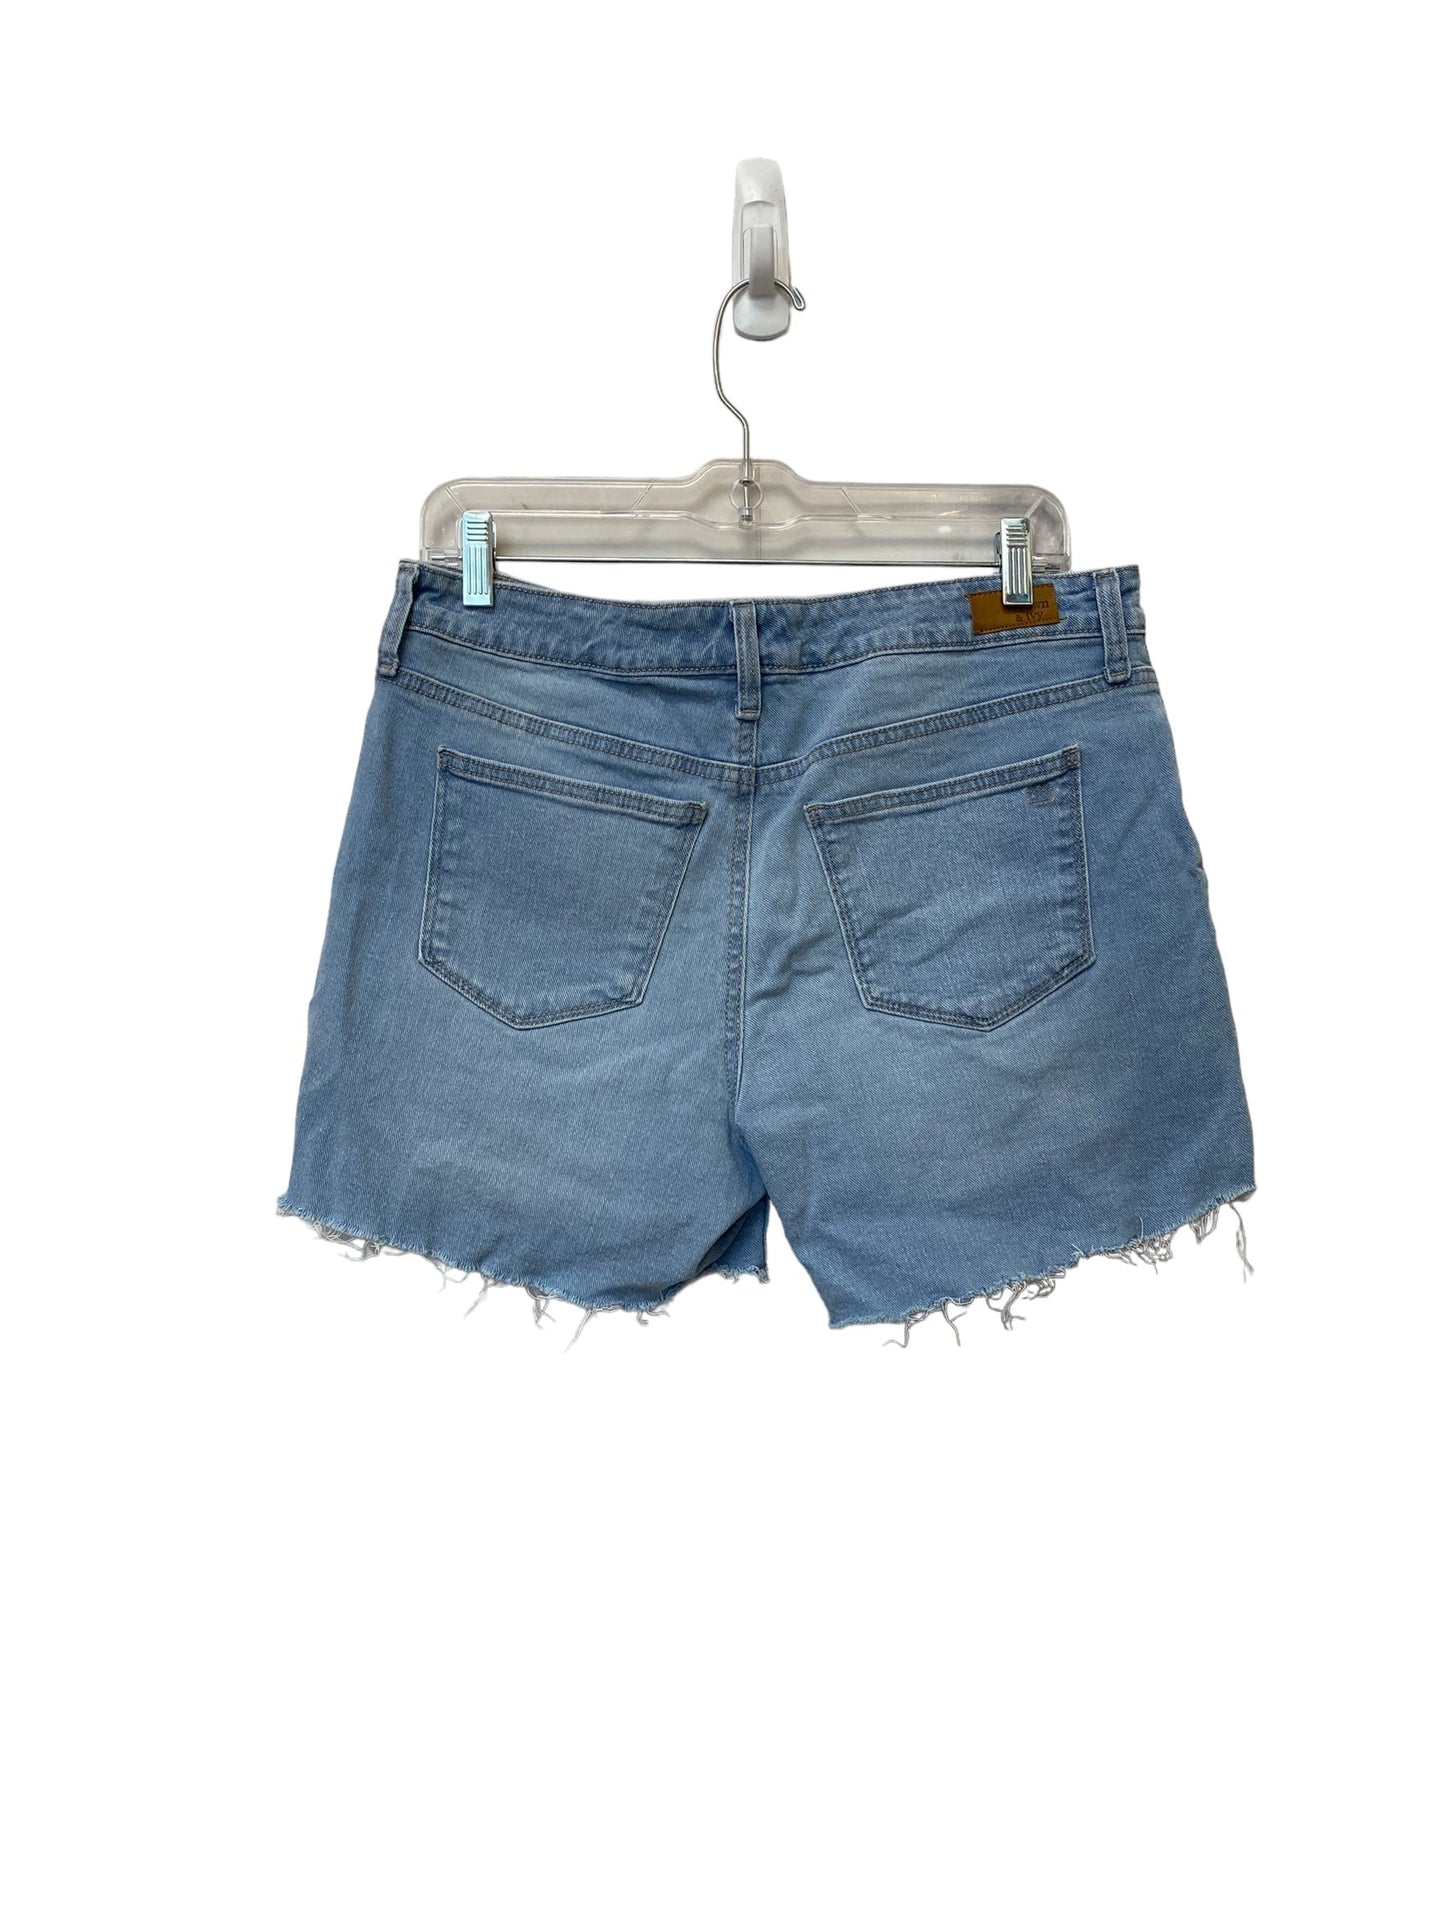 Blue Denim Shorts Crown And Ivy, Size 8